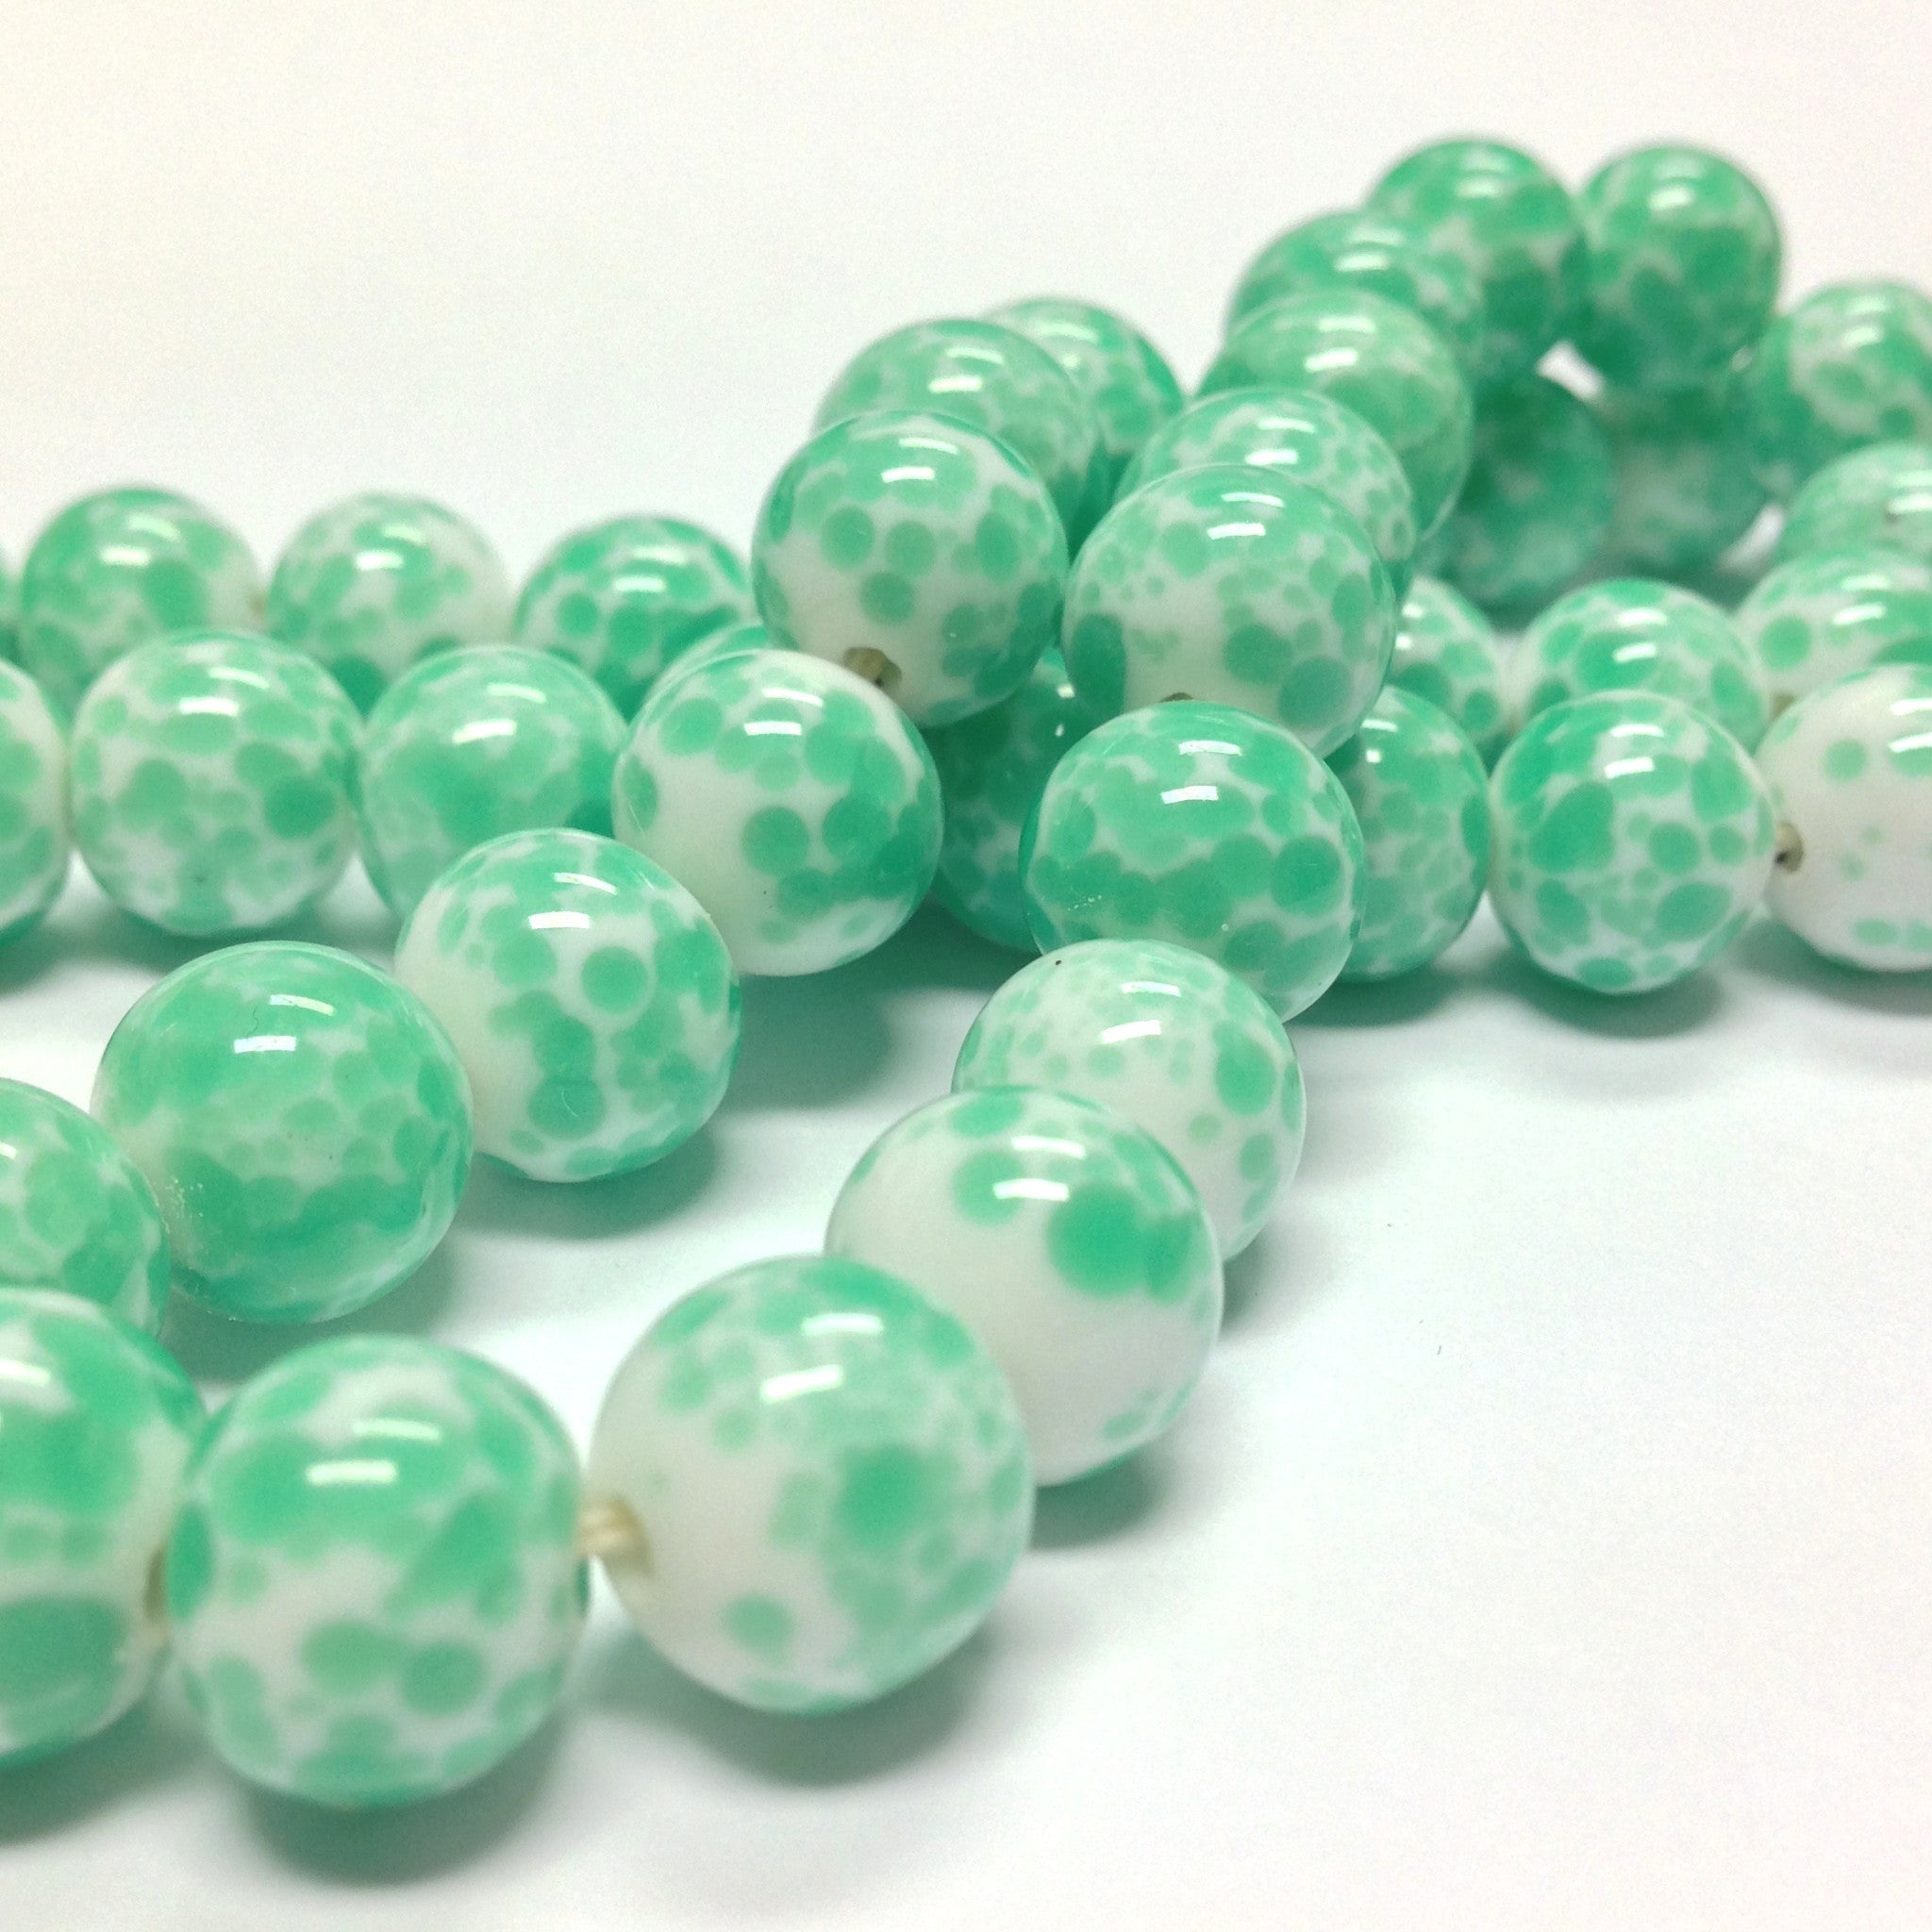 10MM White Luster Glass Beads (100 pieces)